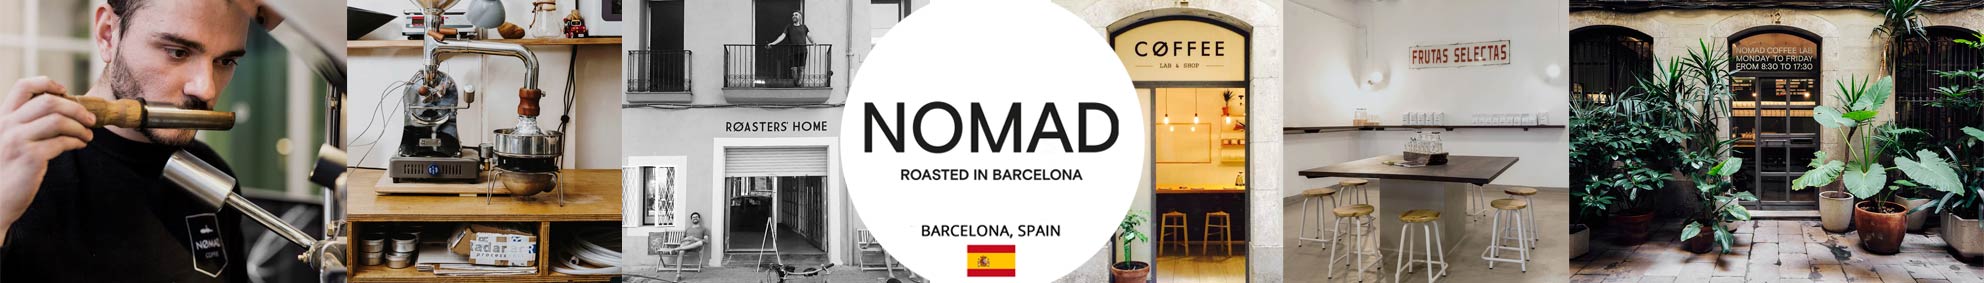 Nomad Coffee Roasters Barcelona UK Best Coffee Subscriptions